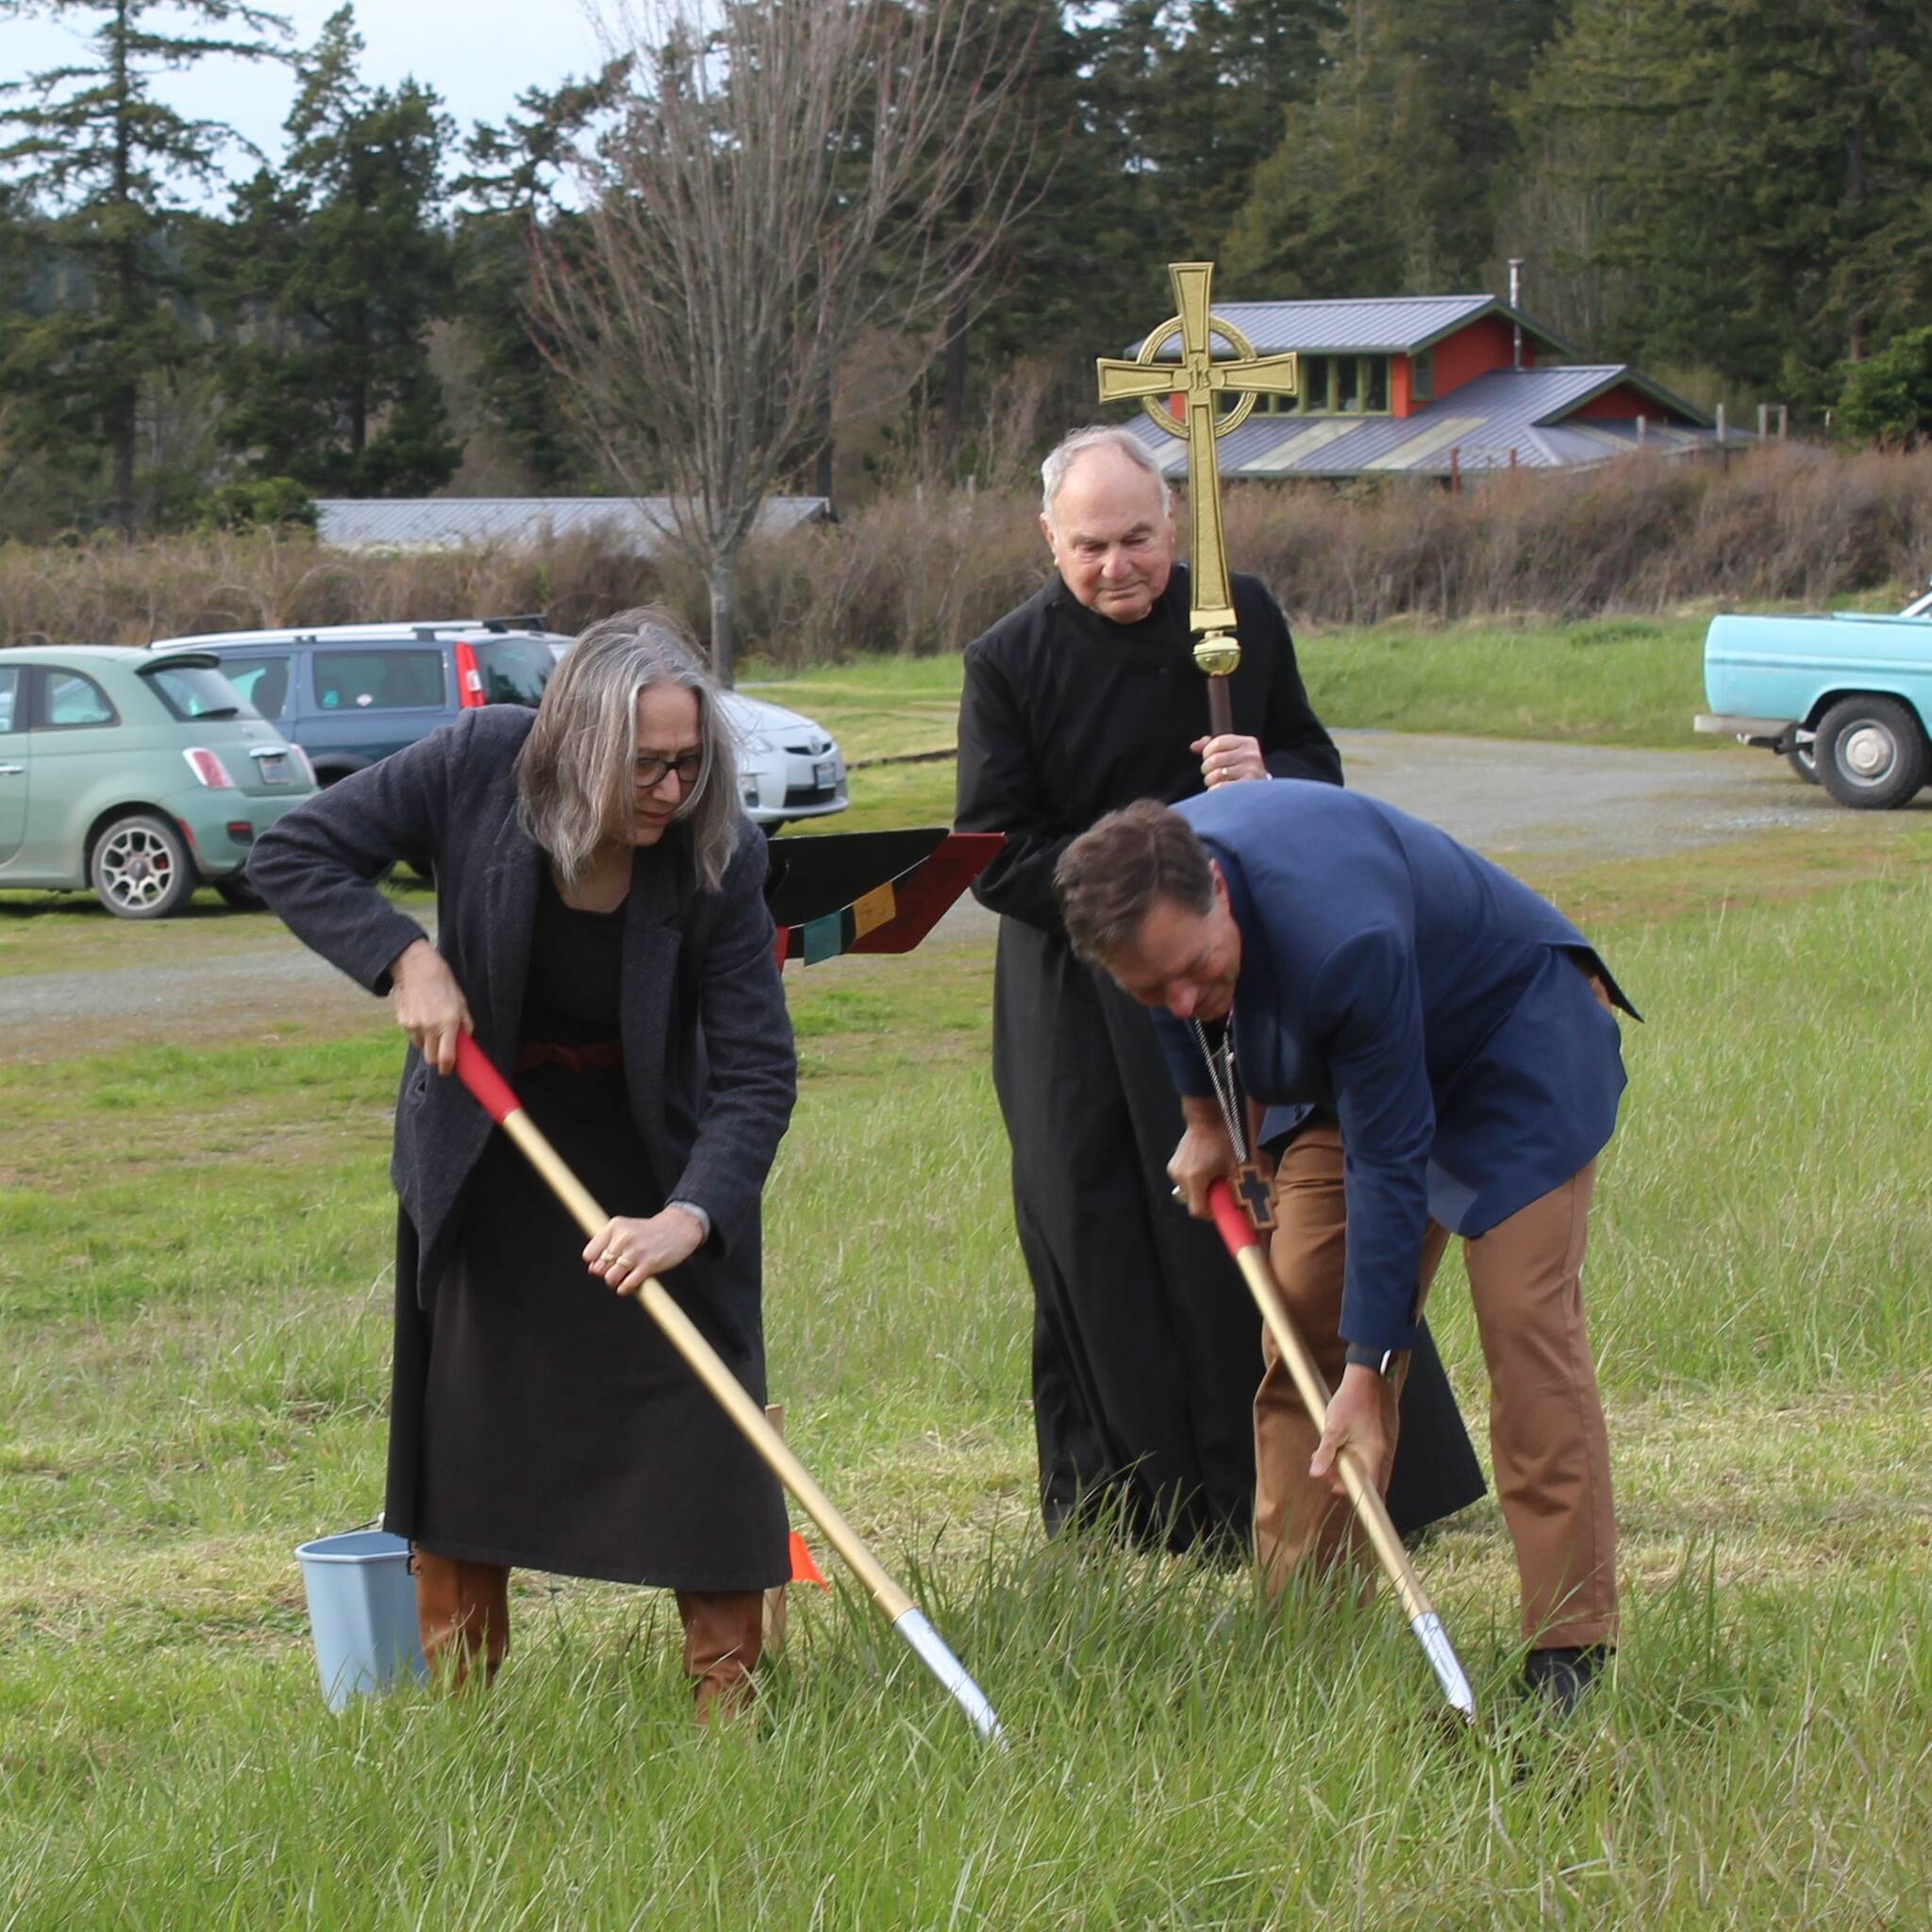 Contributed photo/Bishop Greg Rickel, and Senior Warden Mary Ann Riggs, weilding the shovels, with crucifer Don Langrock (Campaign Fund Treasurer).